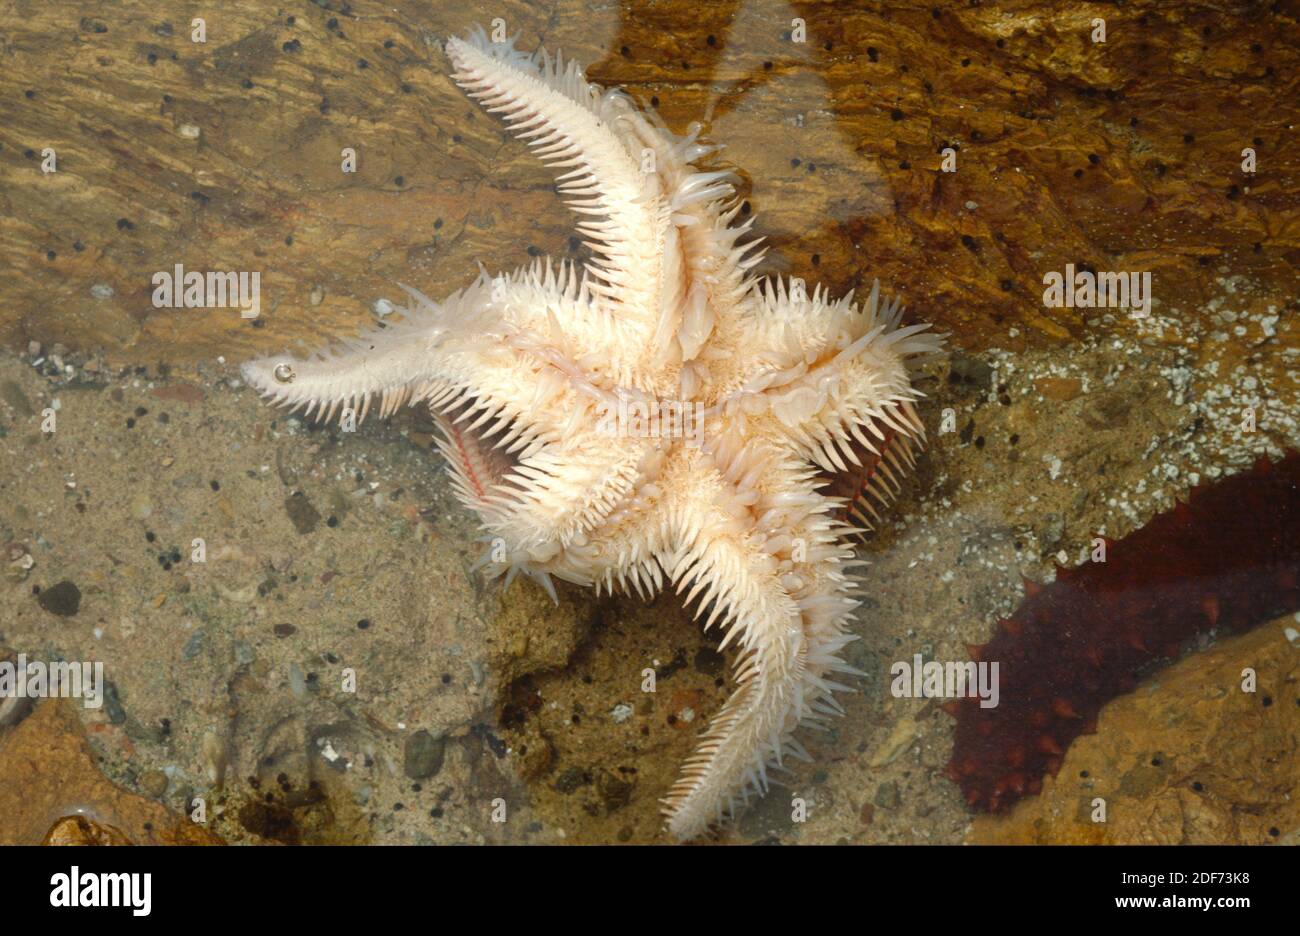 Red comb star (Astropecten aranciacus) is a starfish native to Mediterranean Sea and eastern Atlantic. Lower face showing papulae, pedicellaria and Stock Photo